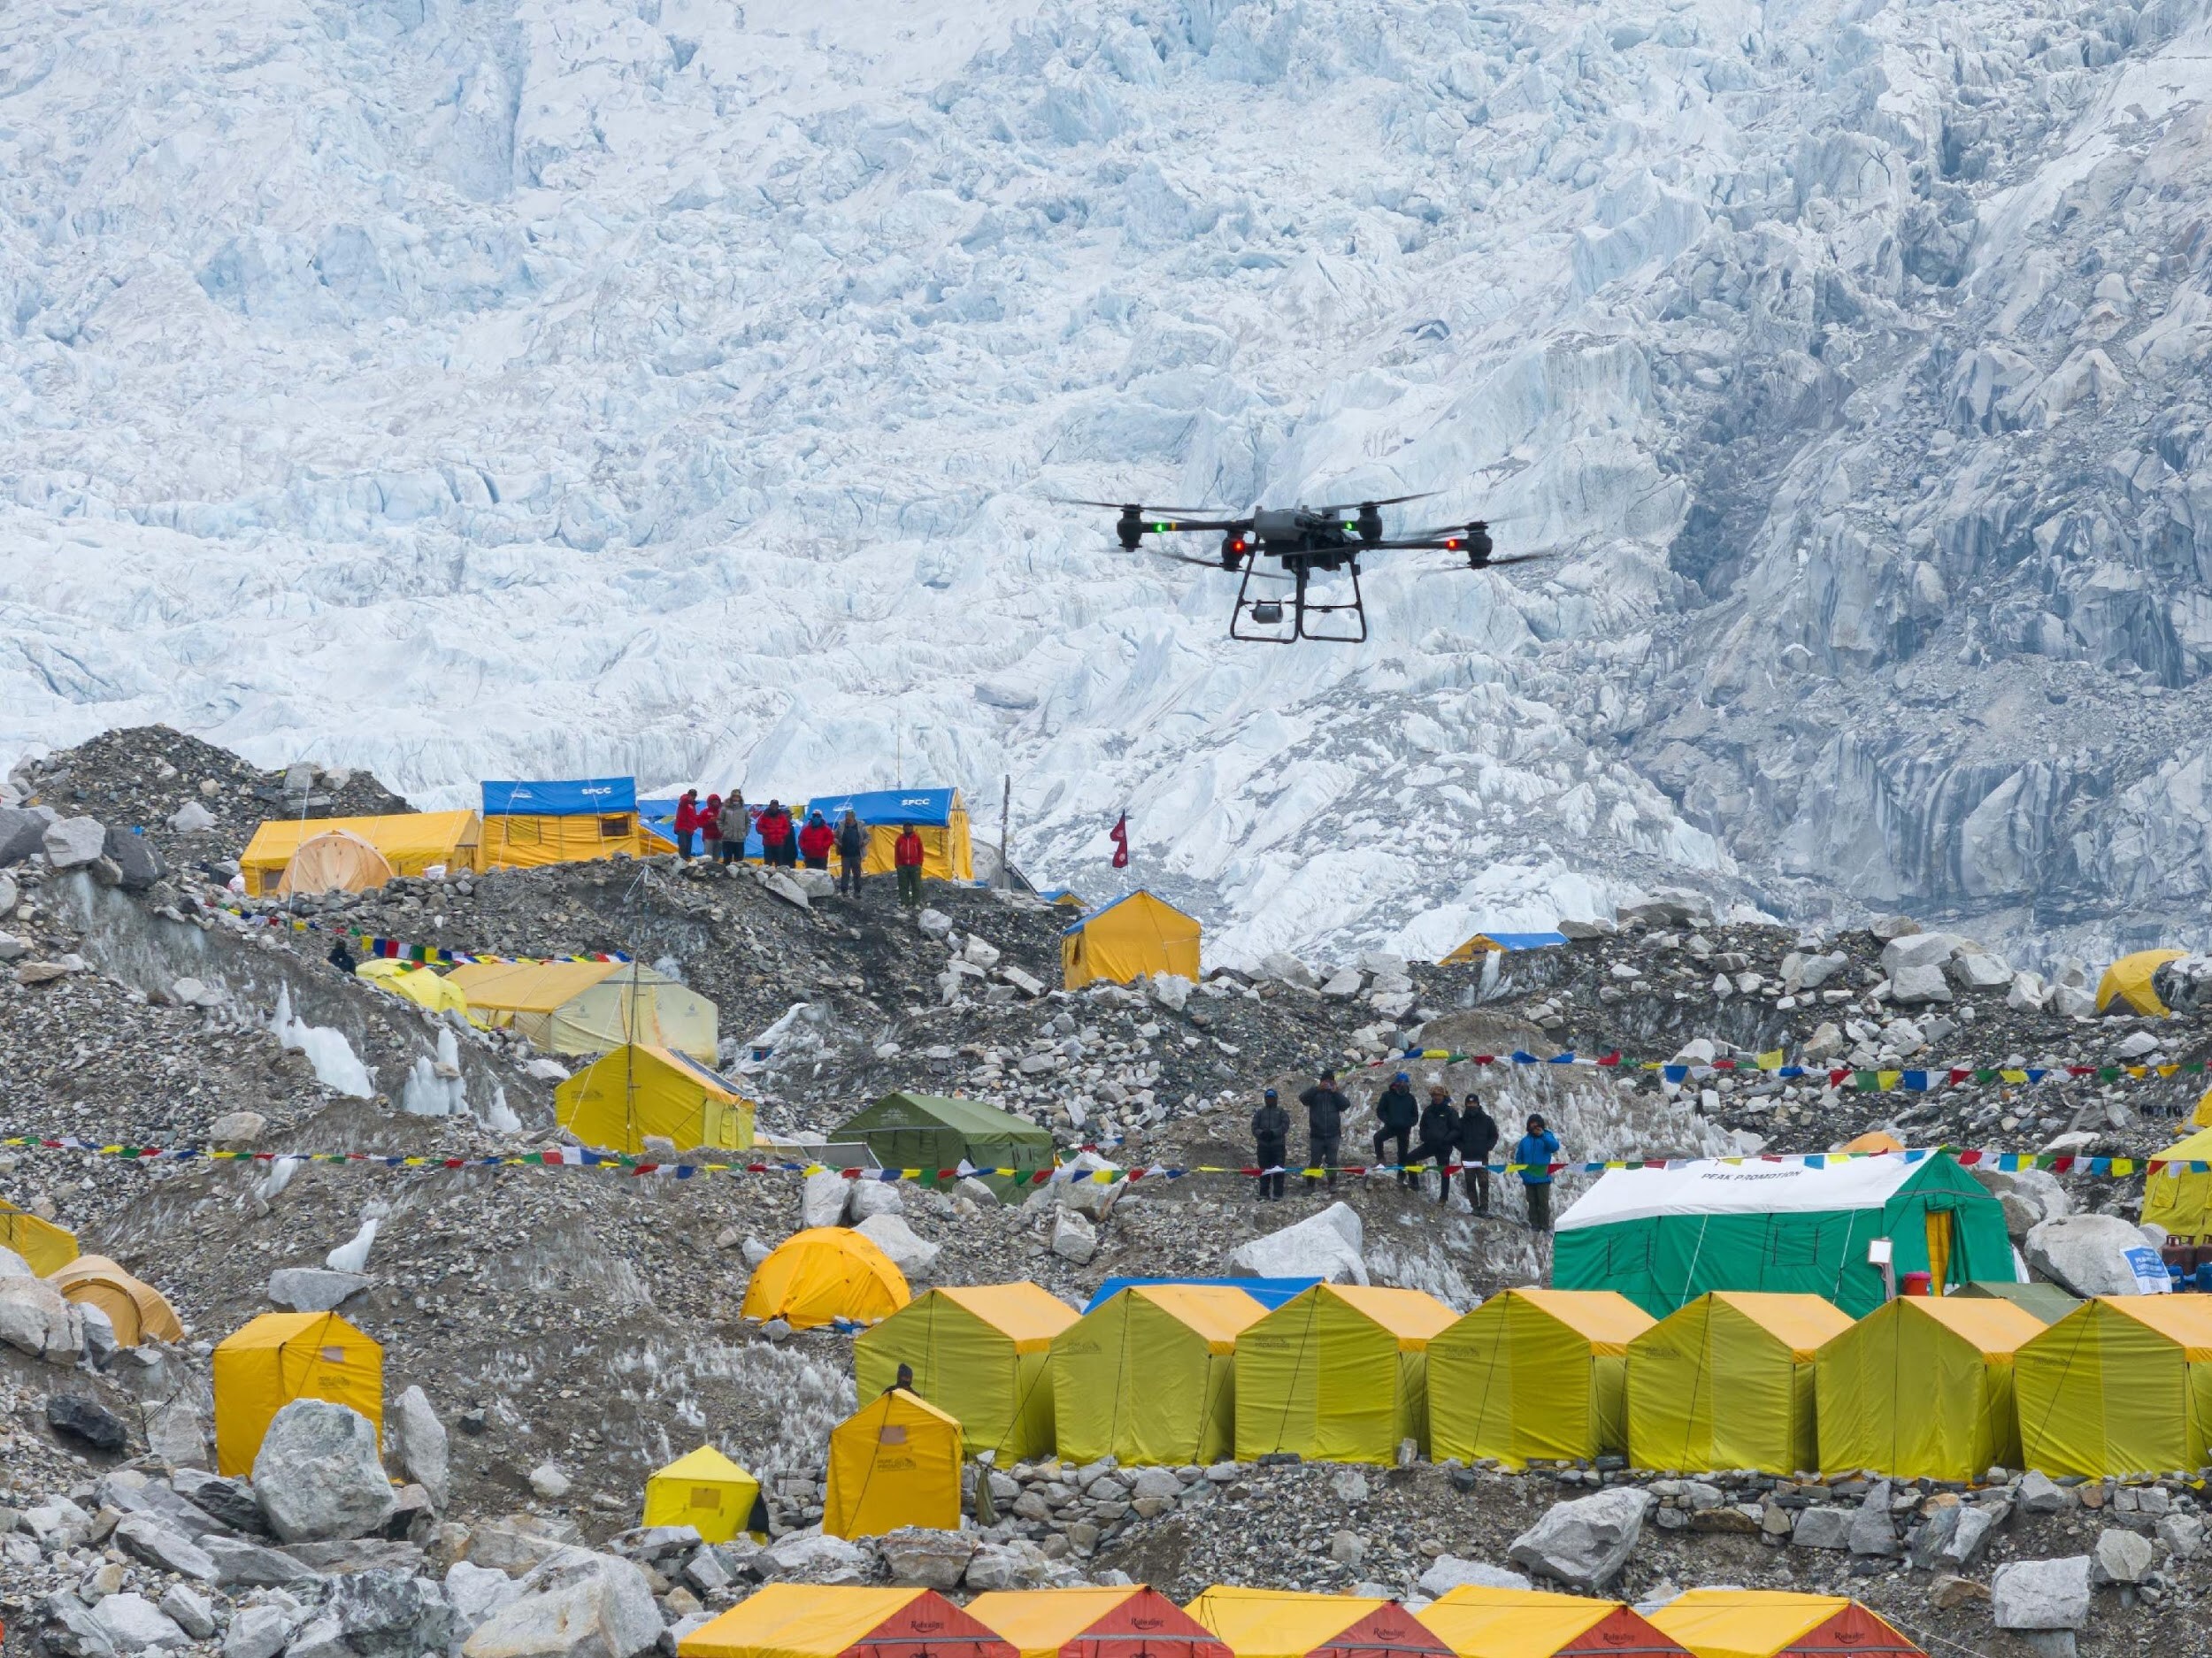 World’s First DJI Drone Supply on Everest